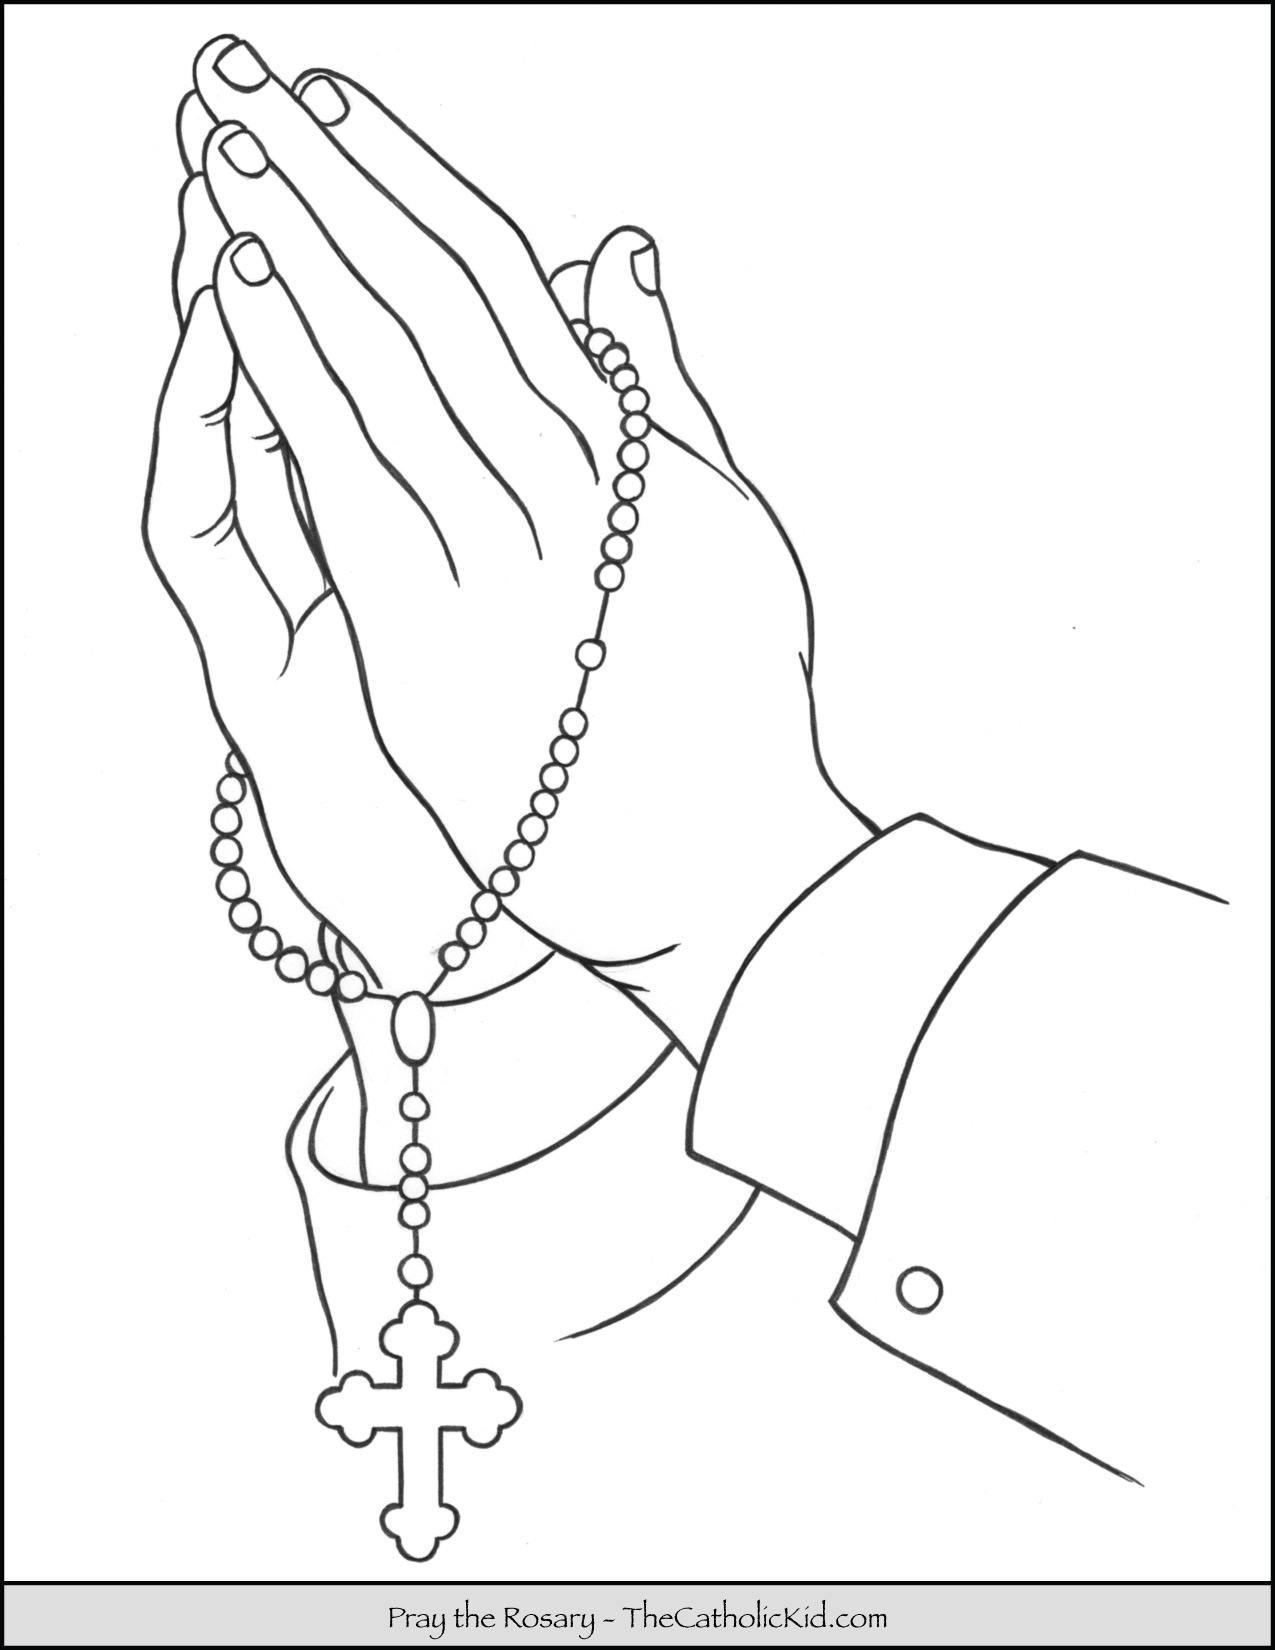 Rosary Coloring Pages - The Catholic Kid